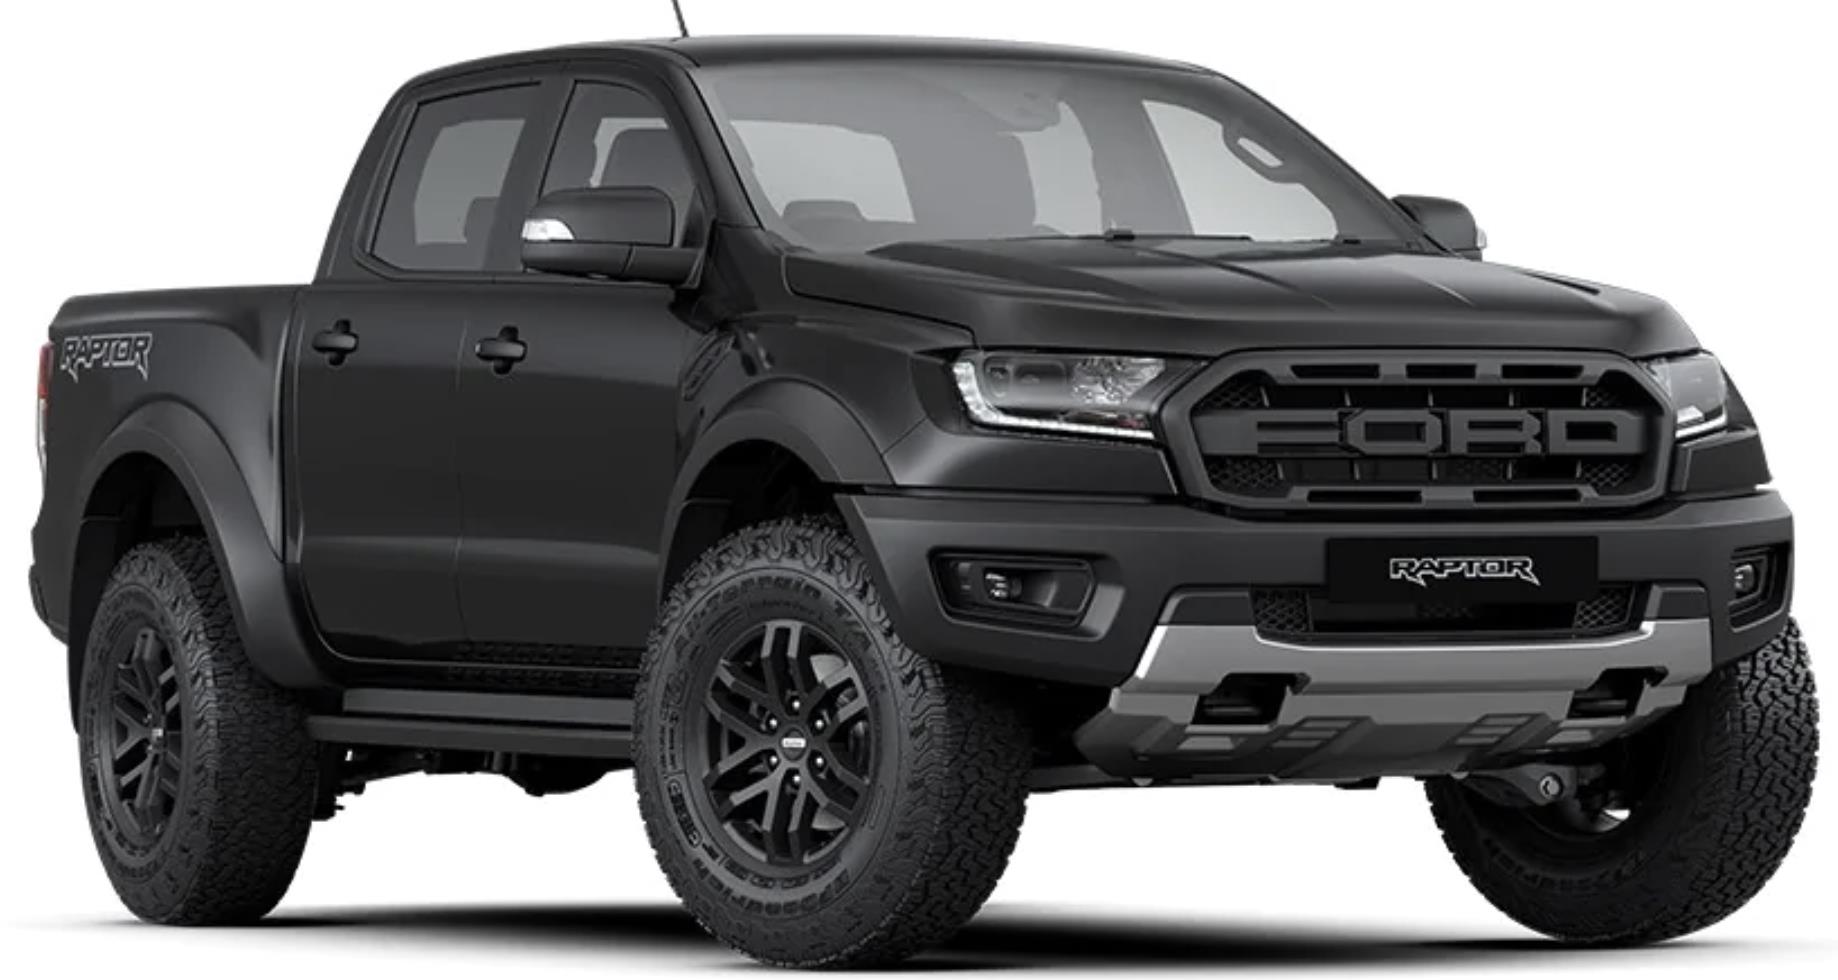 2021 Ford Ranger Raptor Tech Specs And Expected Price In India